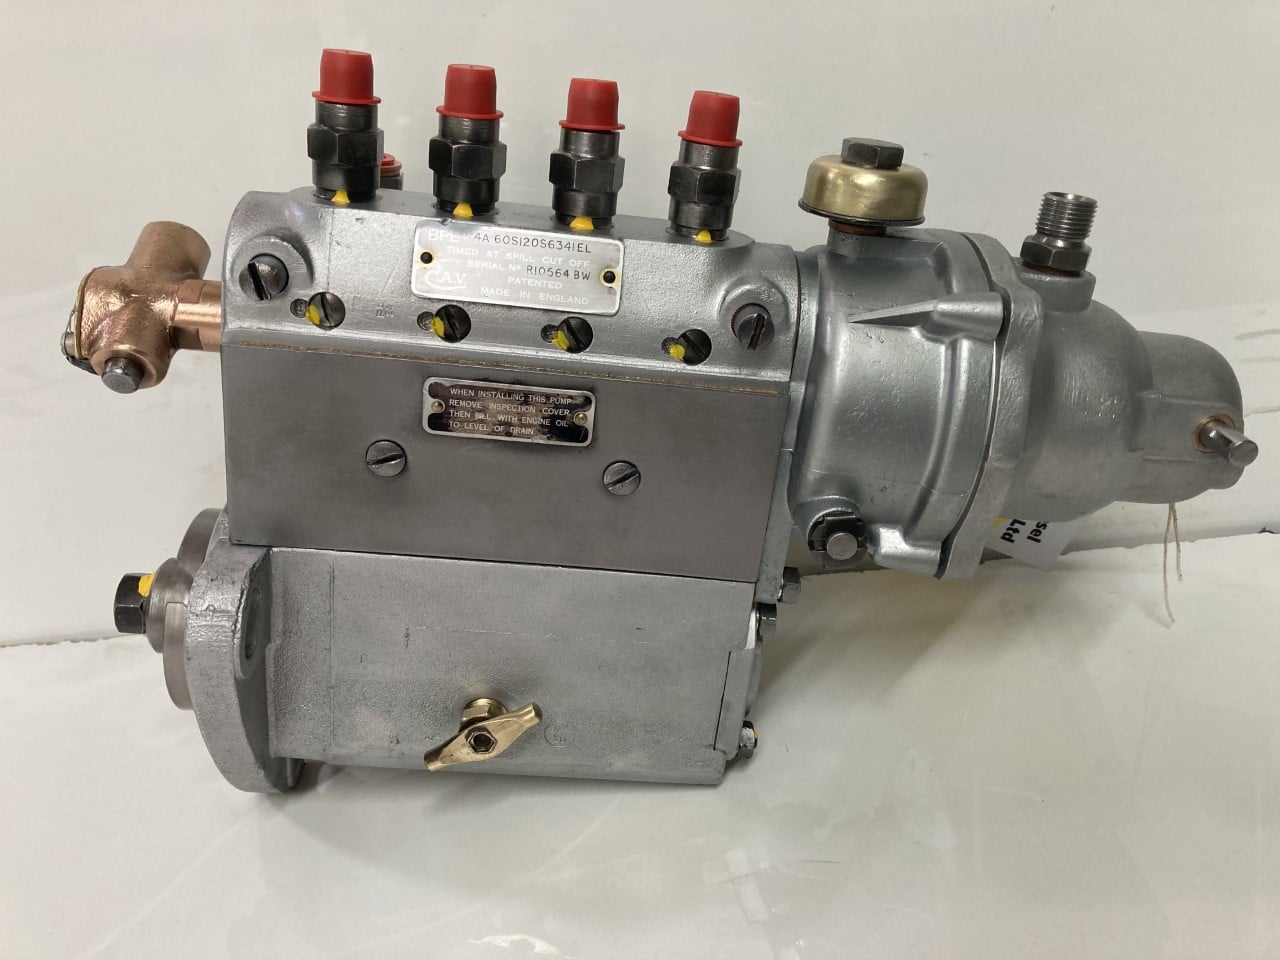 TEF 20 Injector Pump Reconditioned 